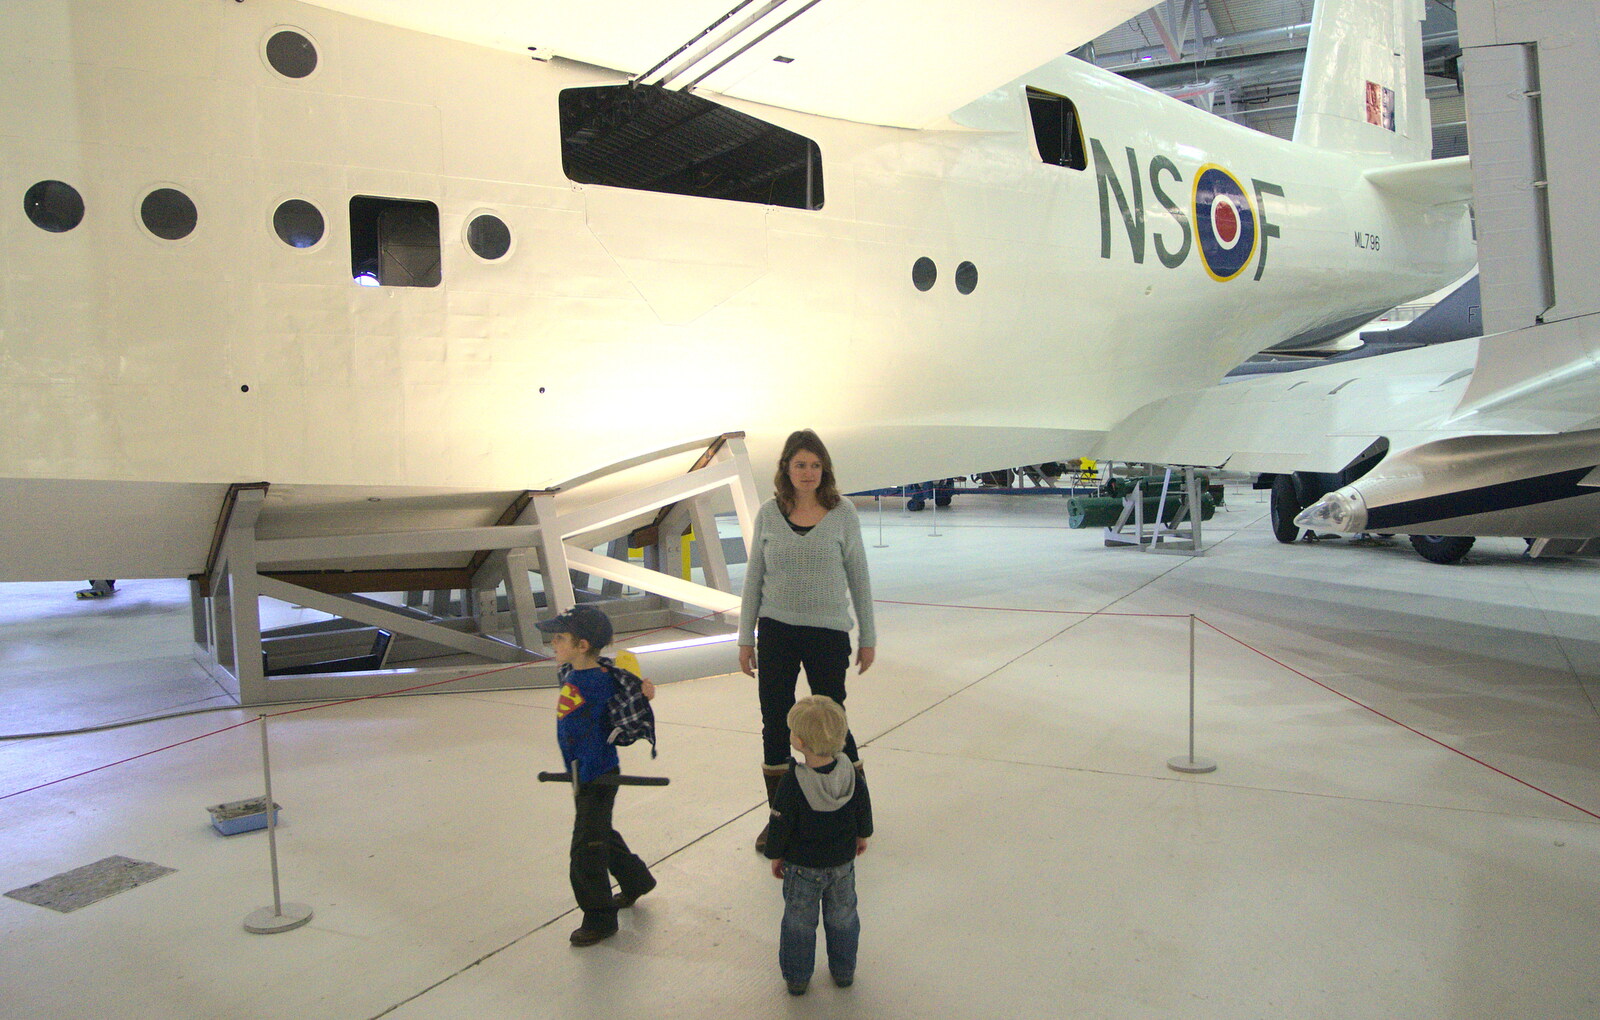 Hanging around under a Sunderland flying boat from A Day Out at Duxford, Cambridgeshire - 9th March 2014